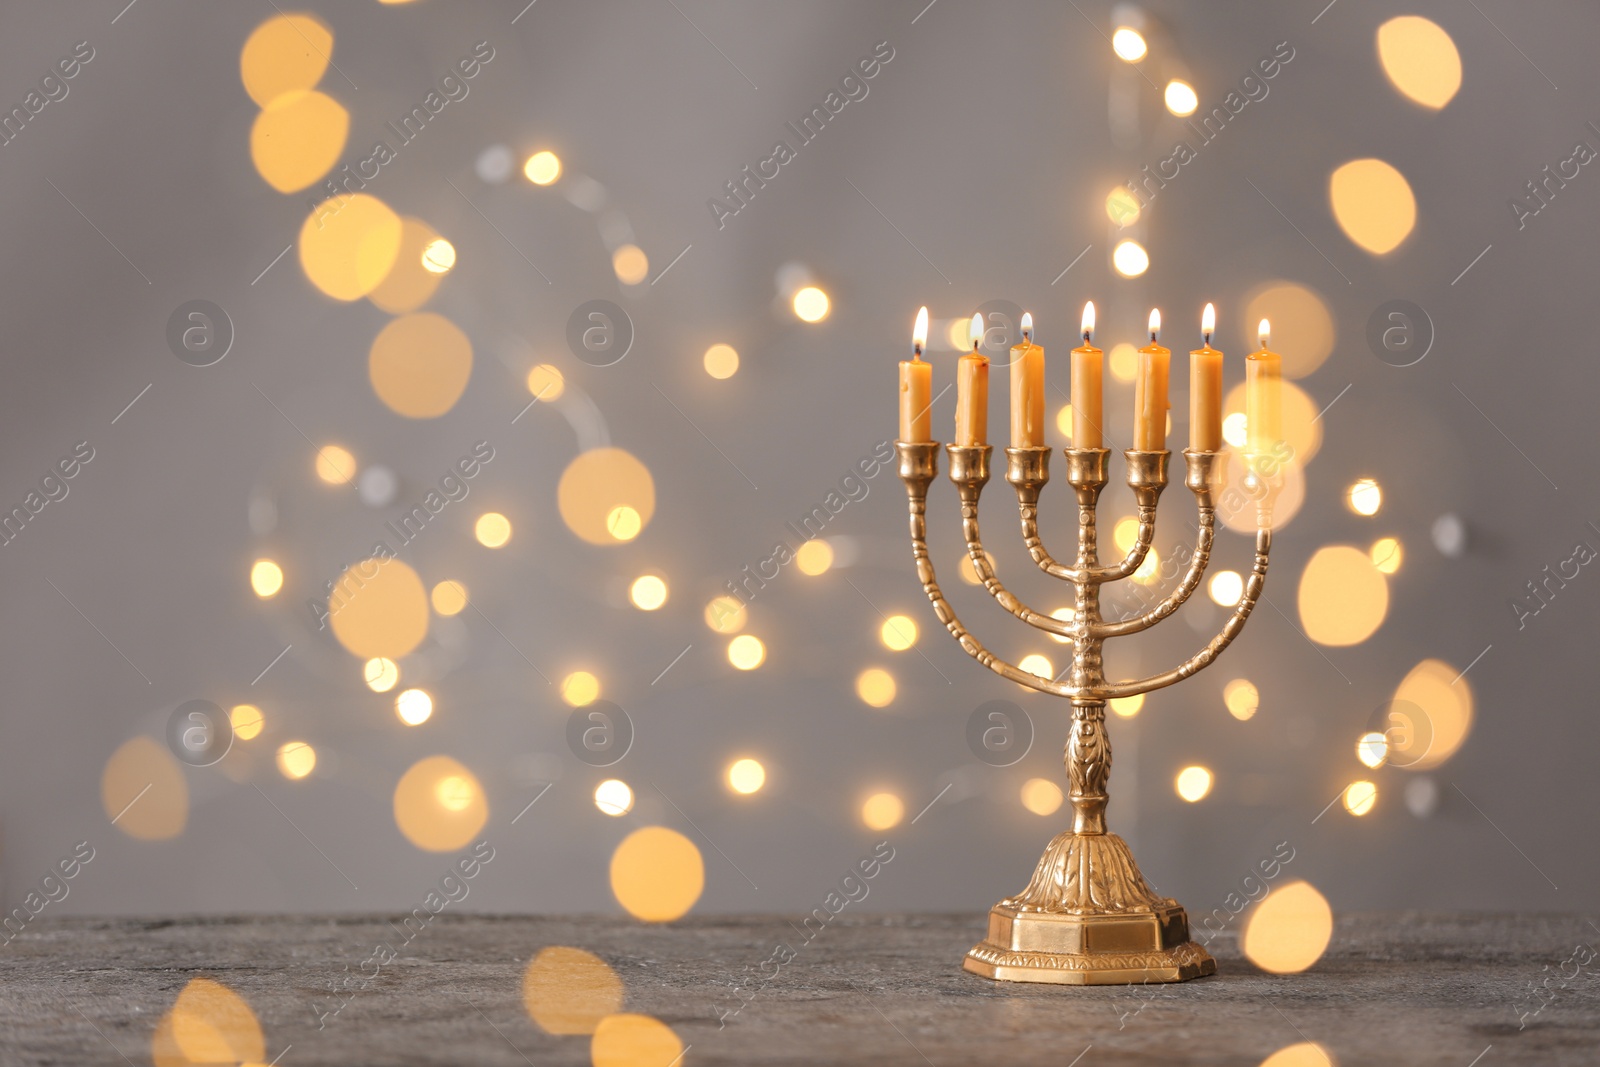 Photo of Golden menorah with burning candles on table against grey background and blurred festive lights, space for text